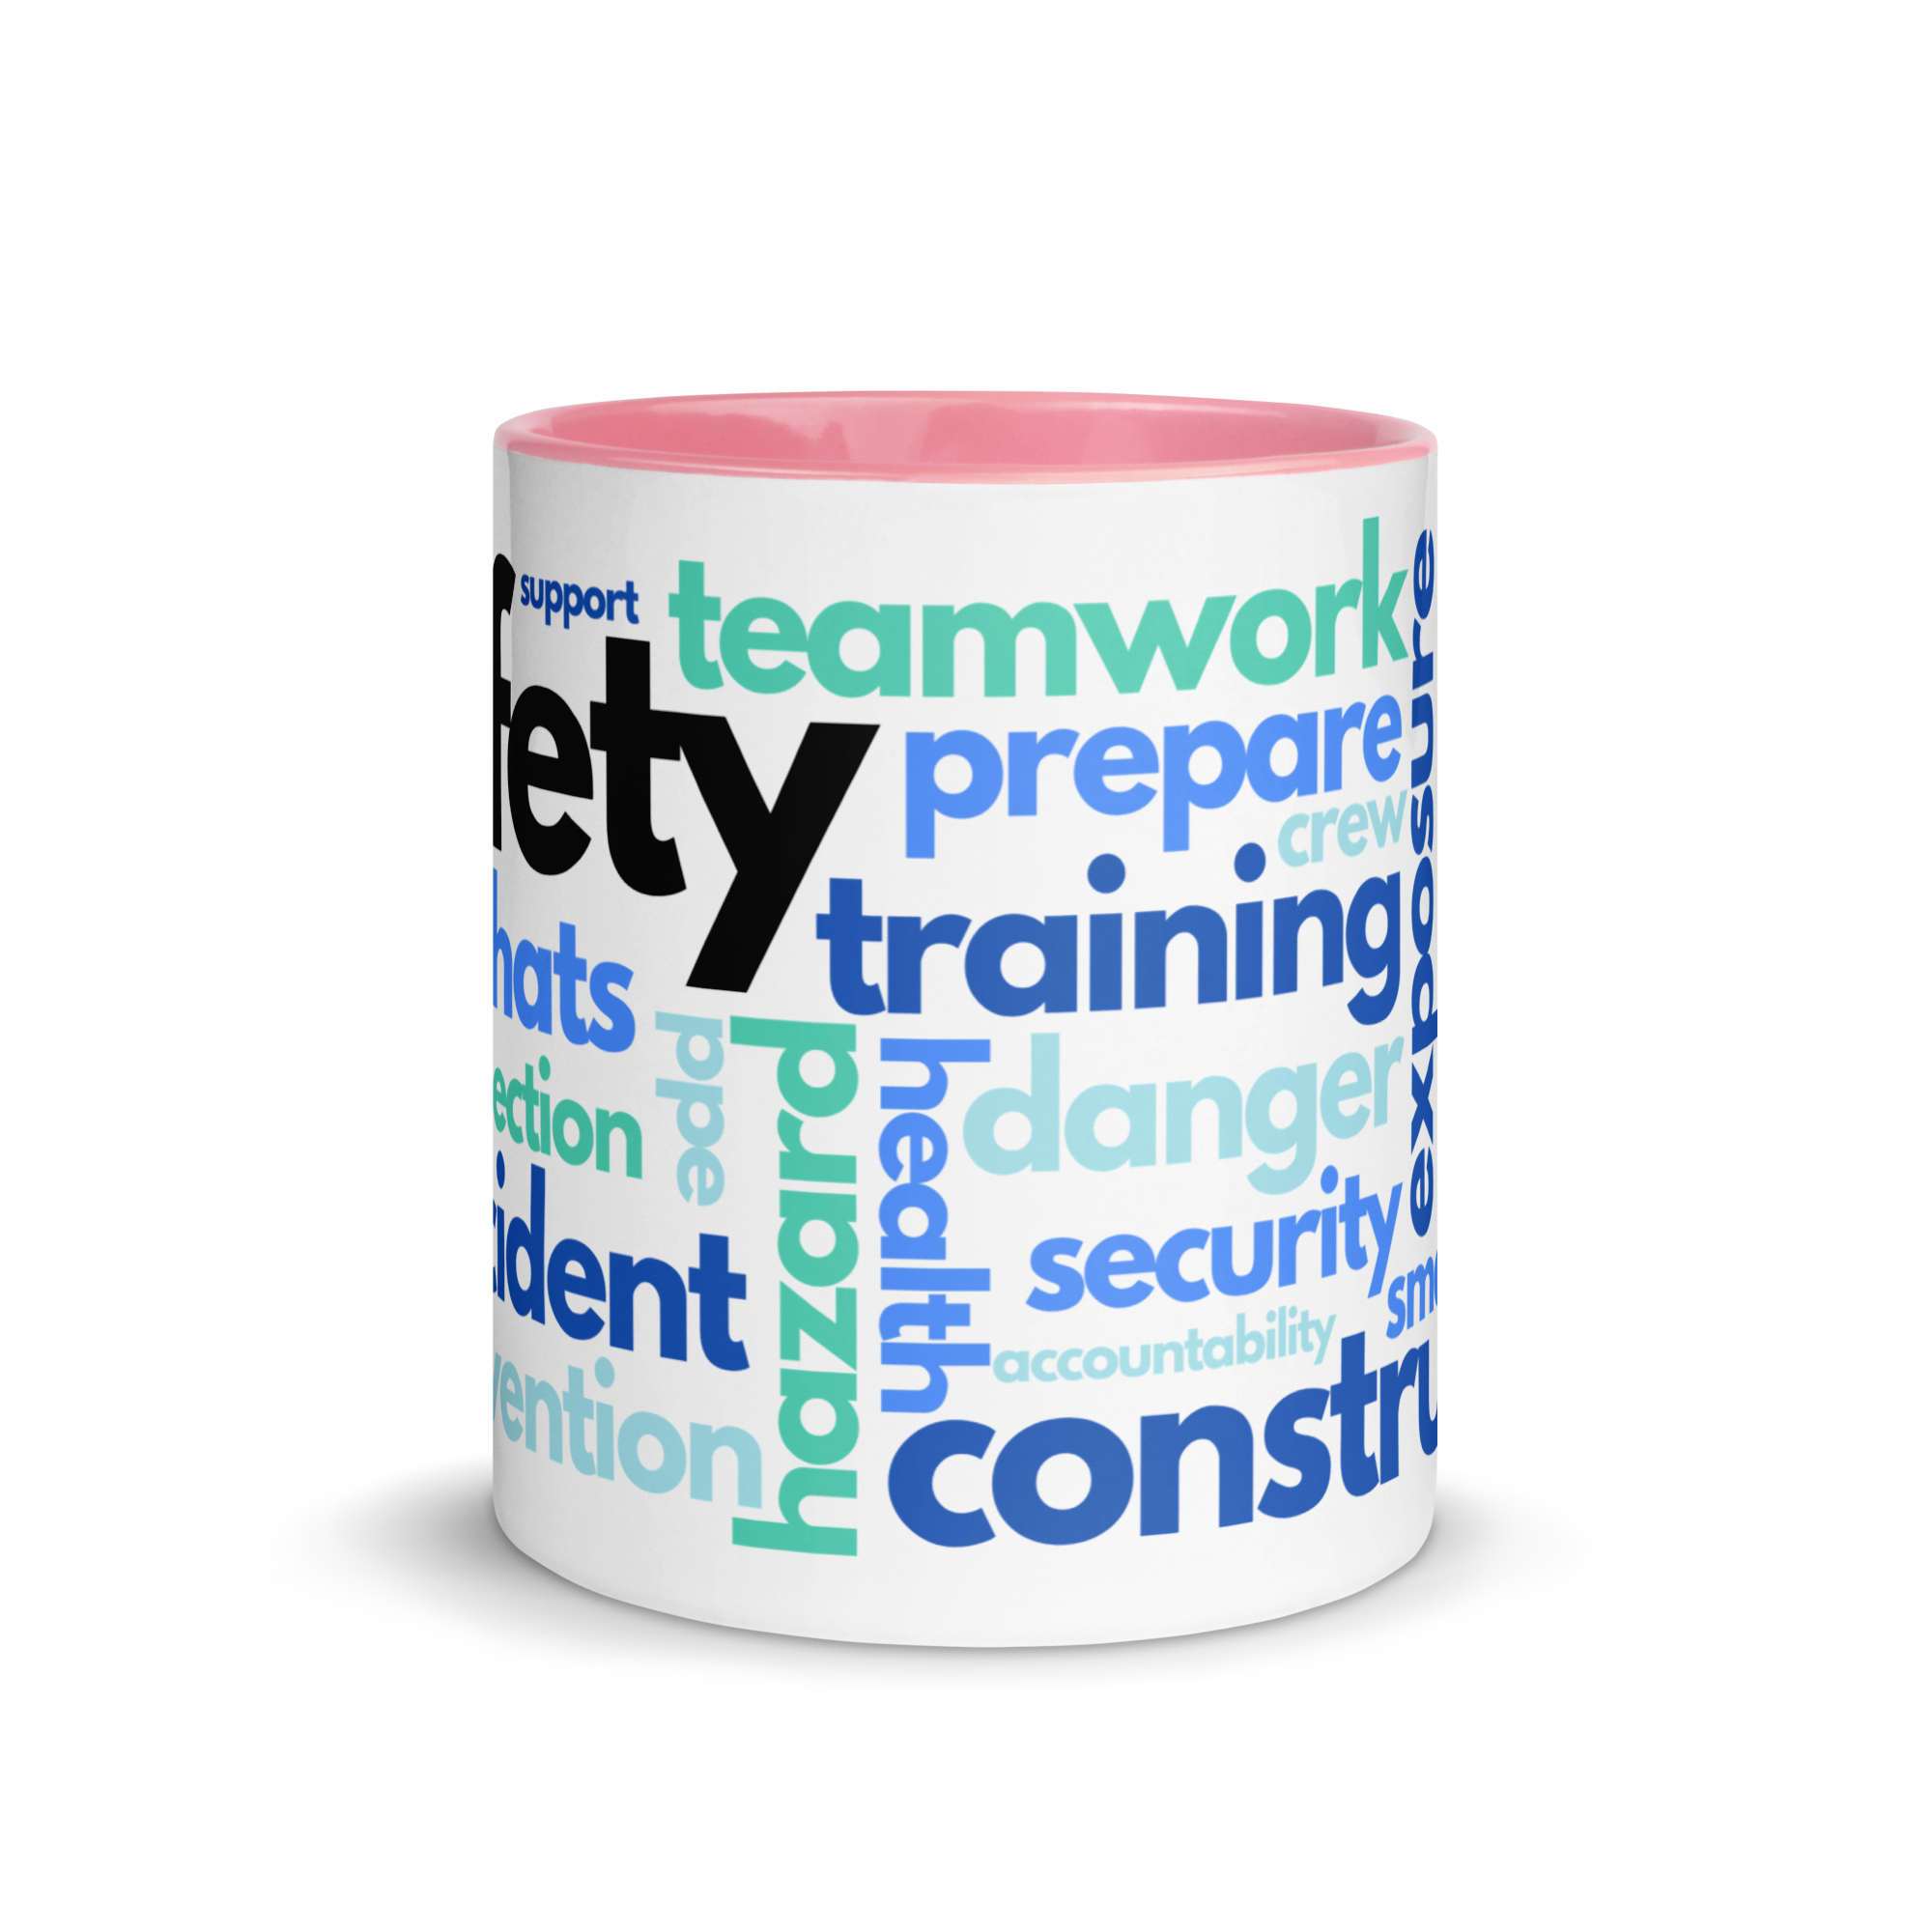 White ceramic mug with safety terms like hard hats, protection, and encourage, in a various shades of blue across the mug with a pink rim, inside, and handle.